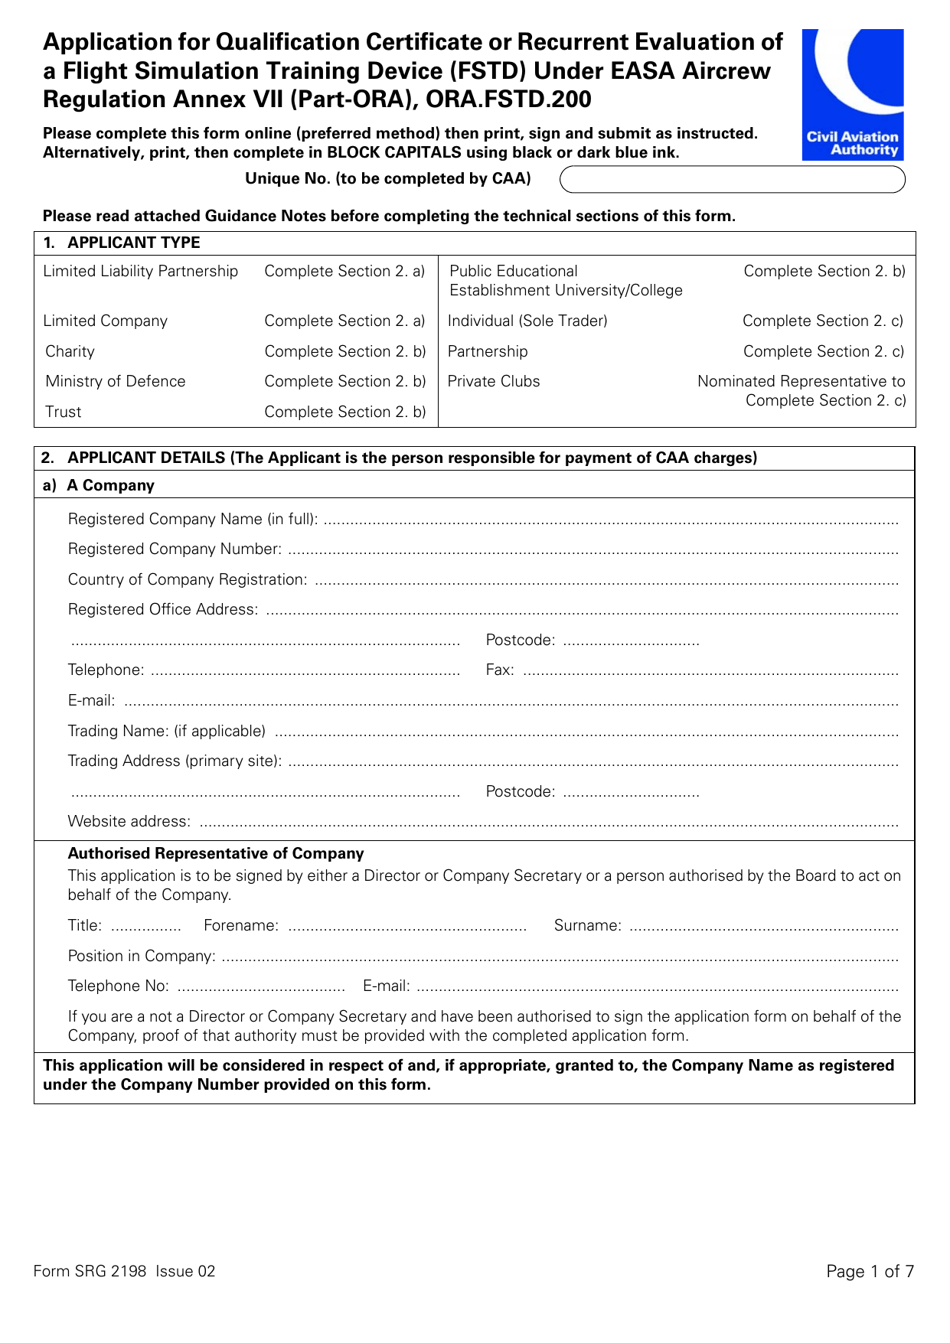 Form SRG2198 Application for Qualification Certificate or Recurrent Evaluation of a Flight Simulation Training Device (Fstd) Under Easa Aircrew Regulation Annex VII (Part-Ora), Ora.fstd.200 - United Kingdom, Page 1